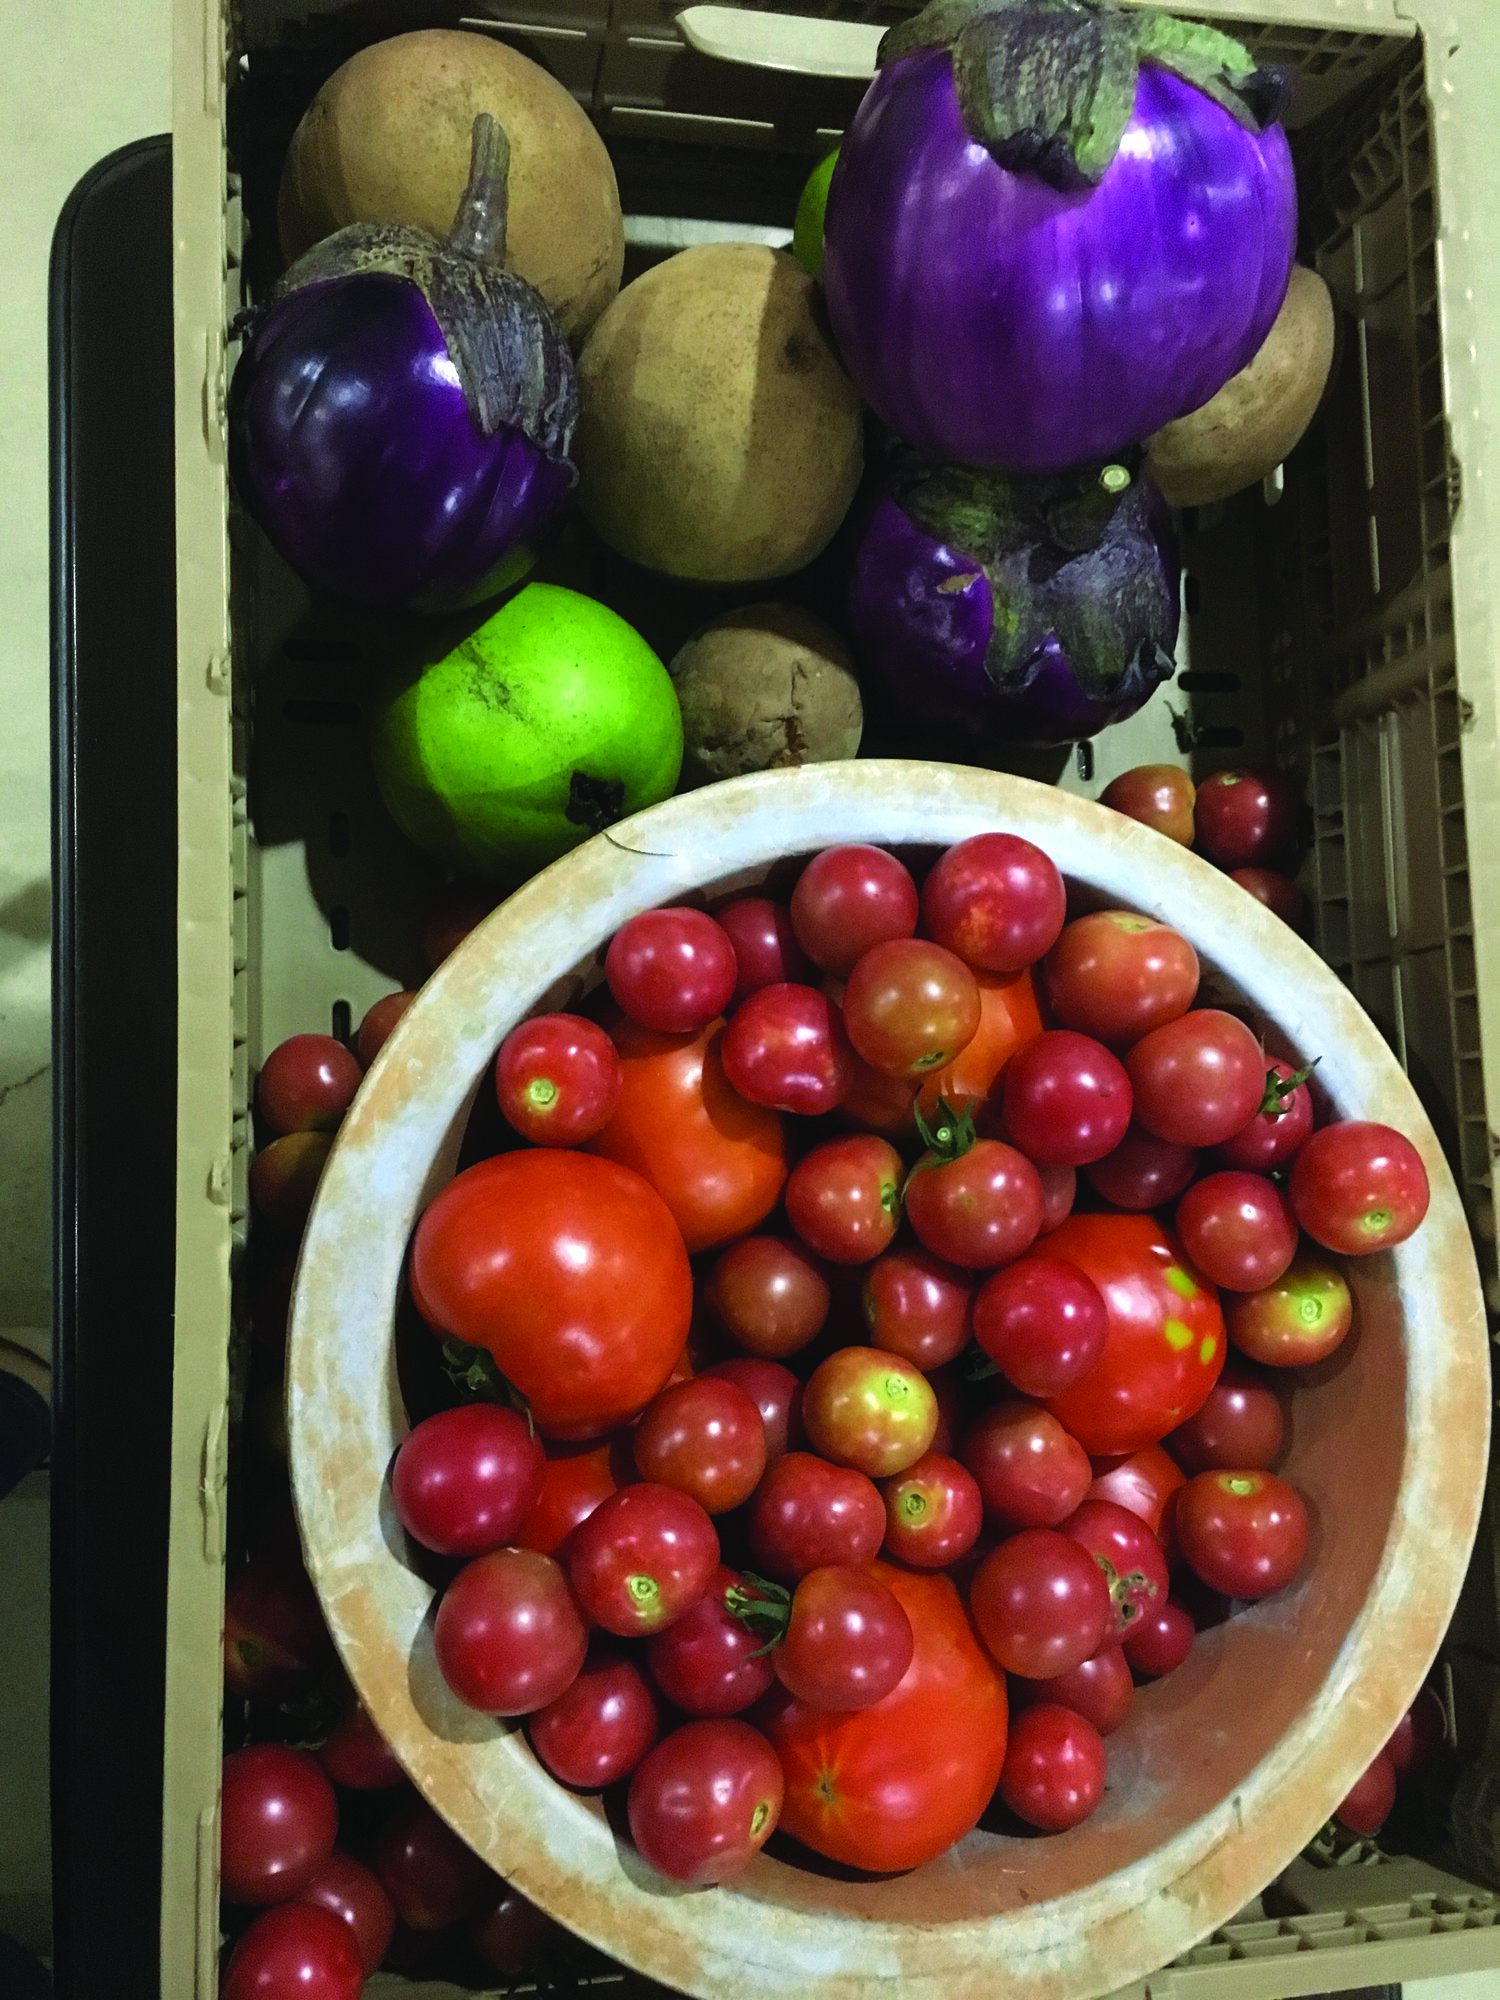 Weekly donations are gathered for Cultivate Abundance donations. This week, seasonal eggplant and tomatoes were stars of the show.